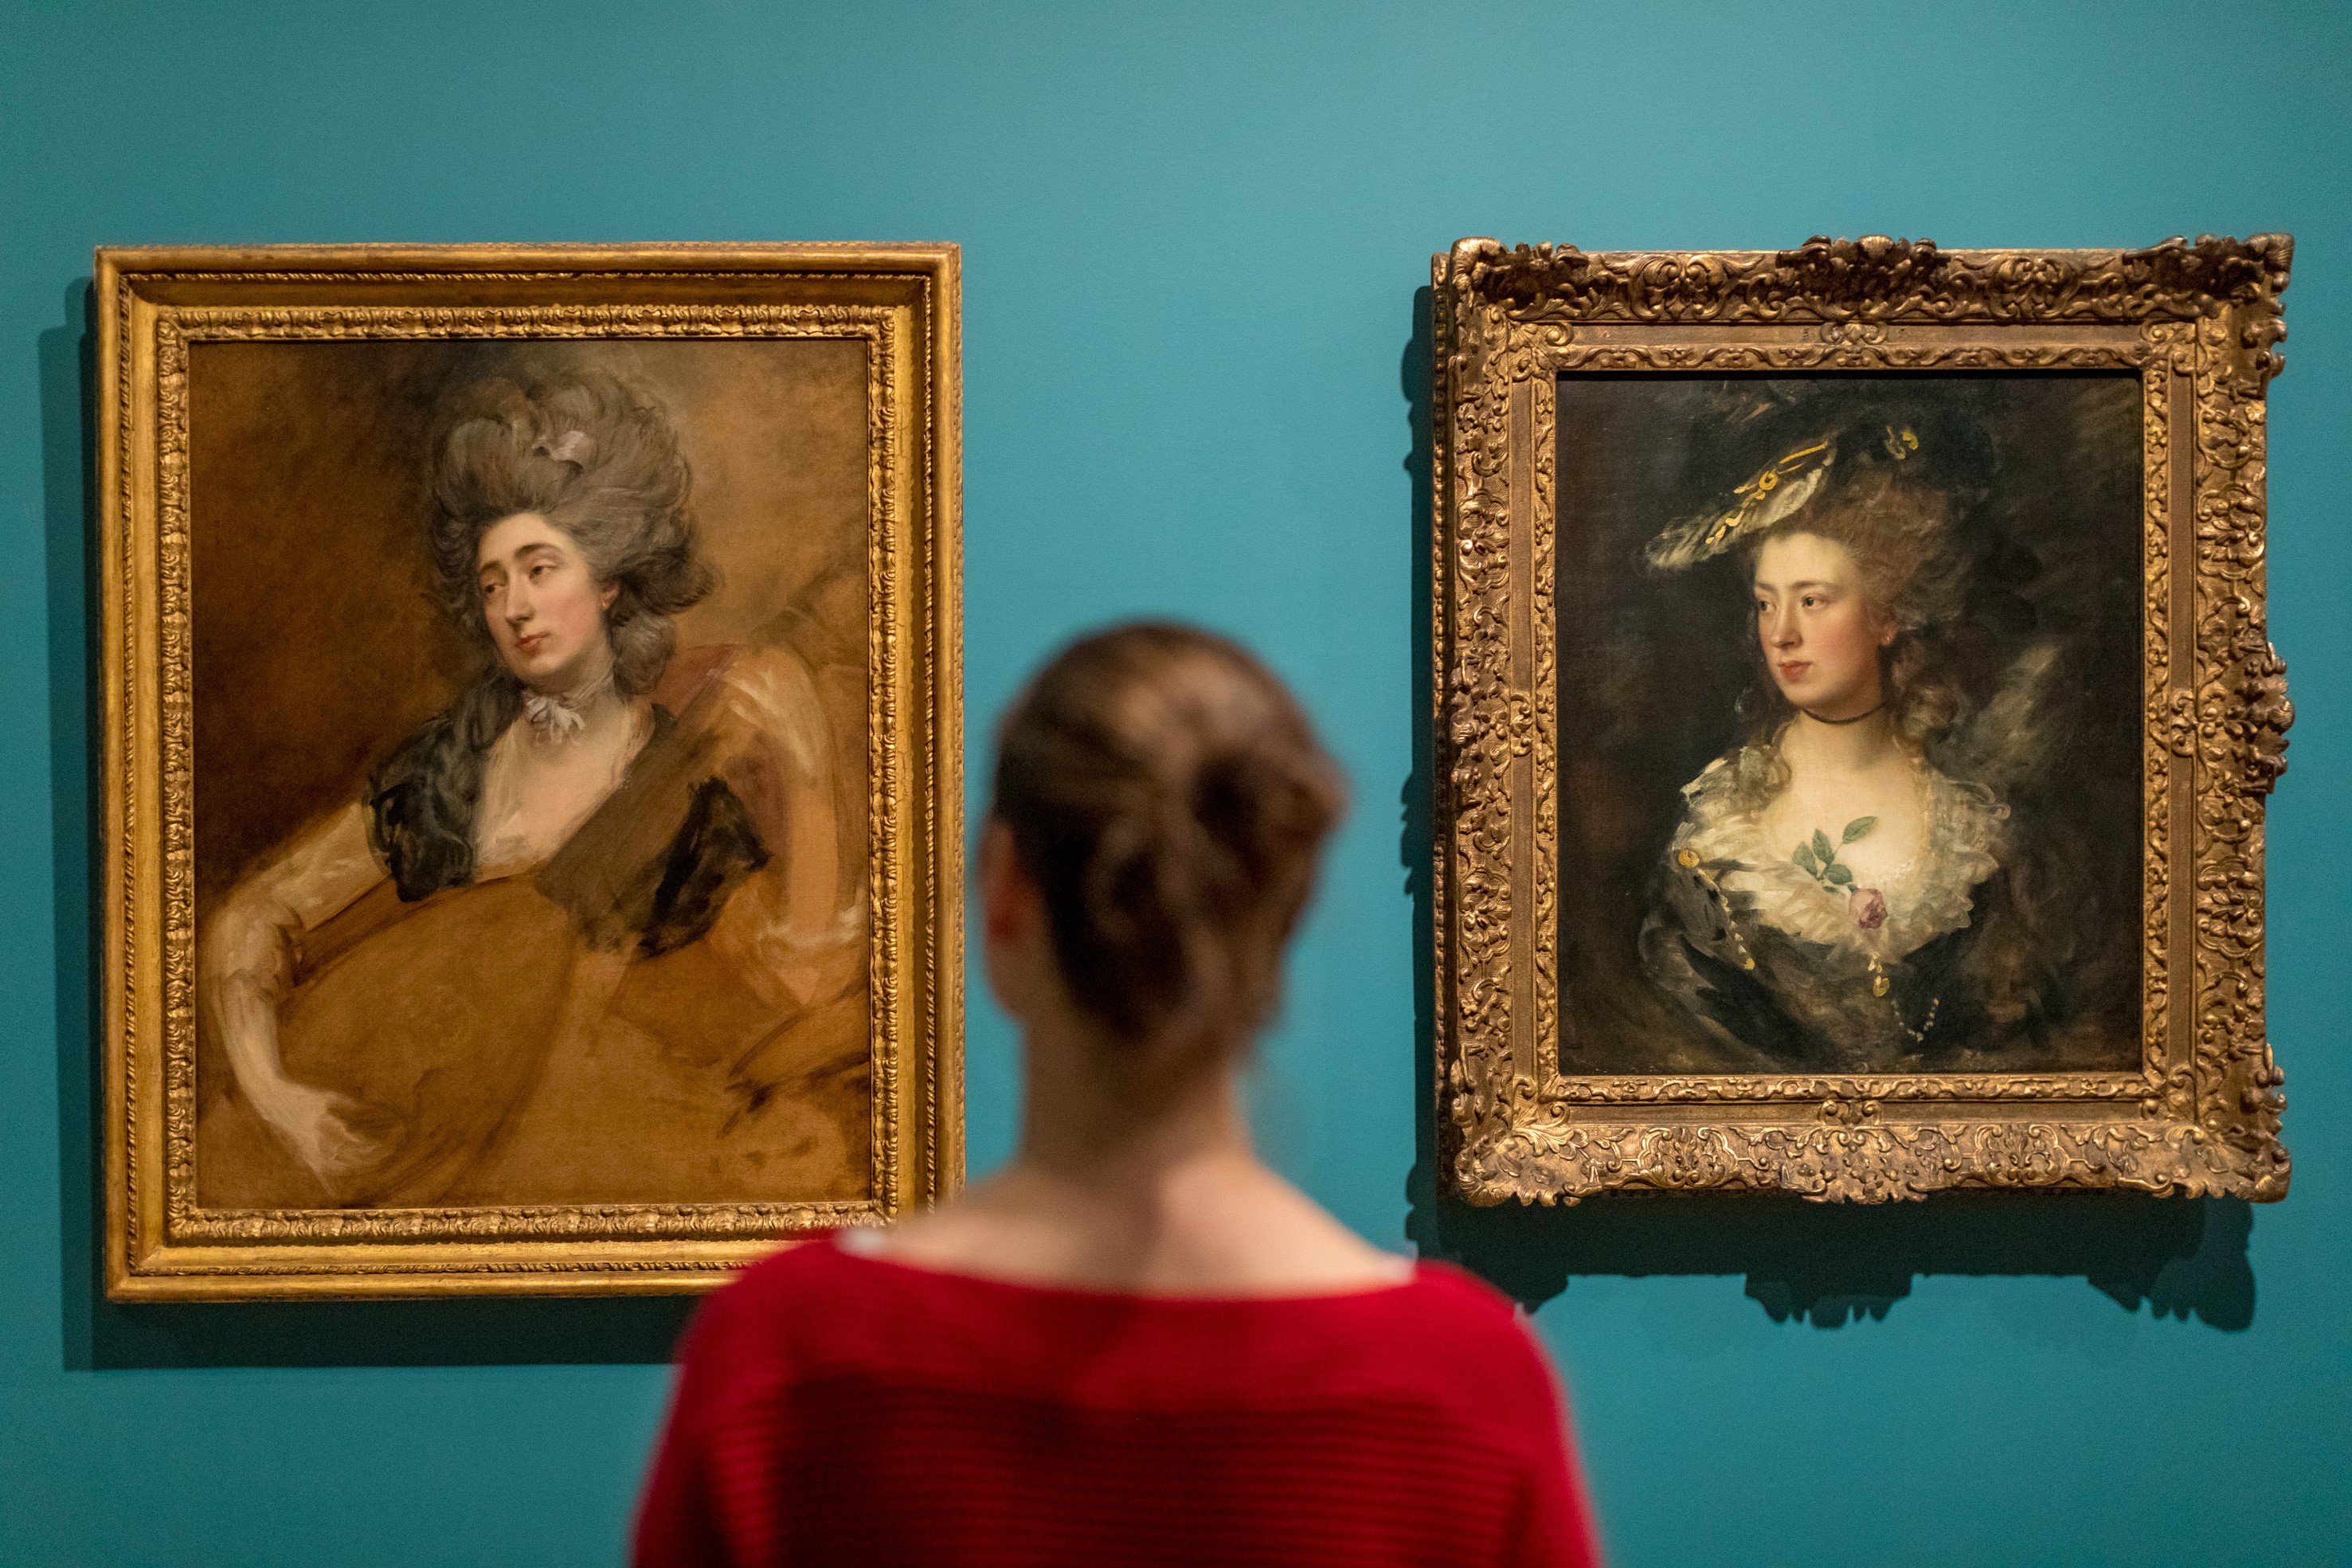 The painting goes on display at the National Portrait Gallery next to a portrait of Gainsborough's other daughter Mary 